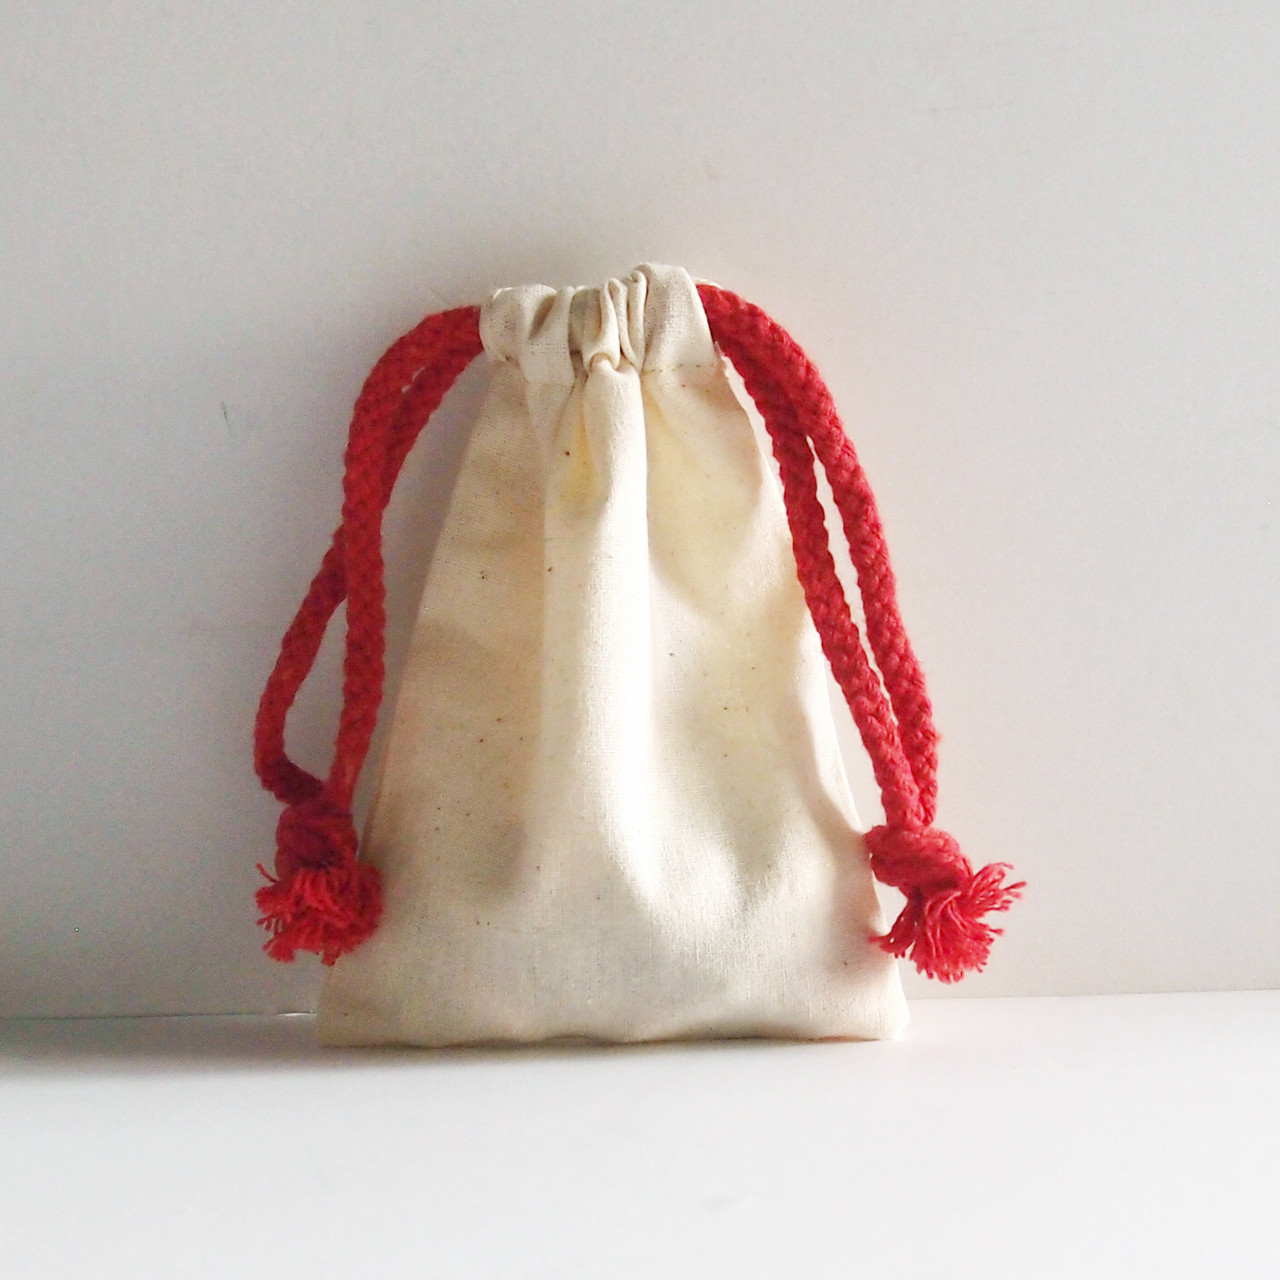 Natural Cotton Canvas Drawstring Bags with Red Drawstring (10 sizes)